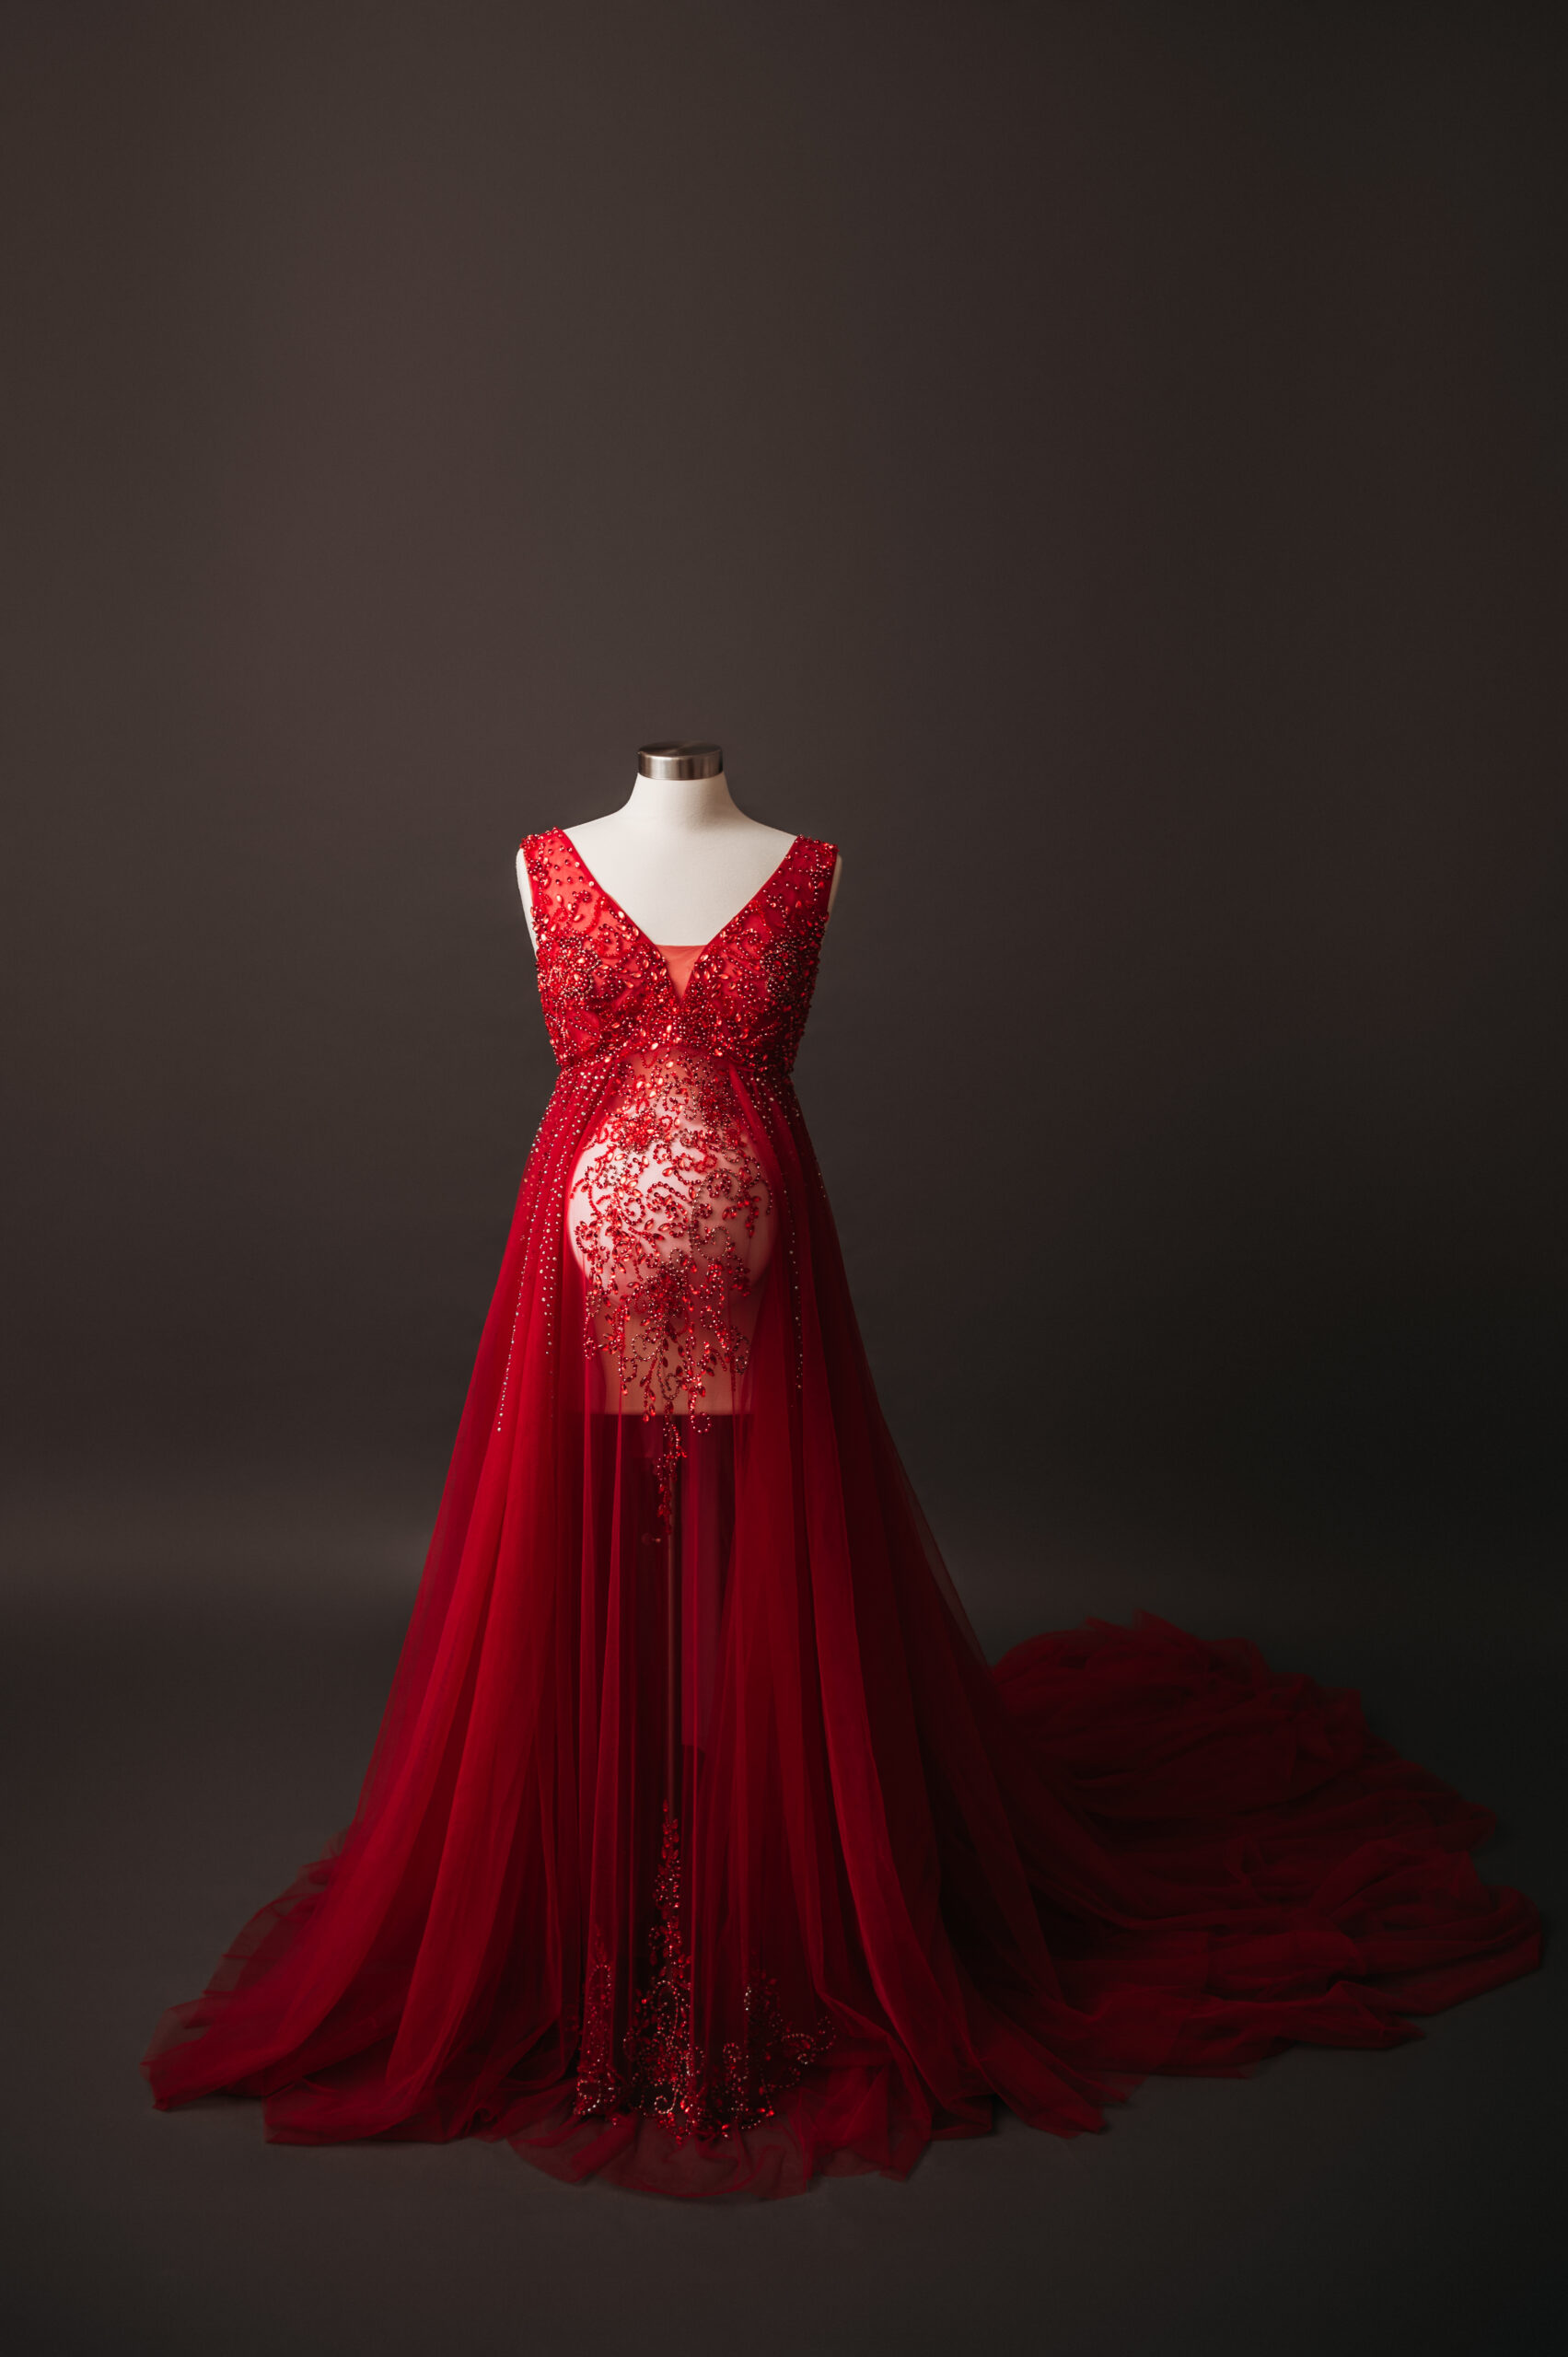 favorite red maternity gown